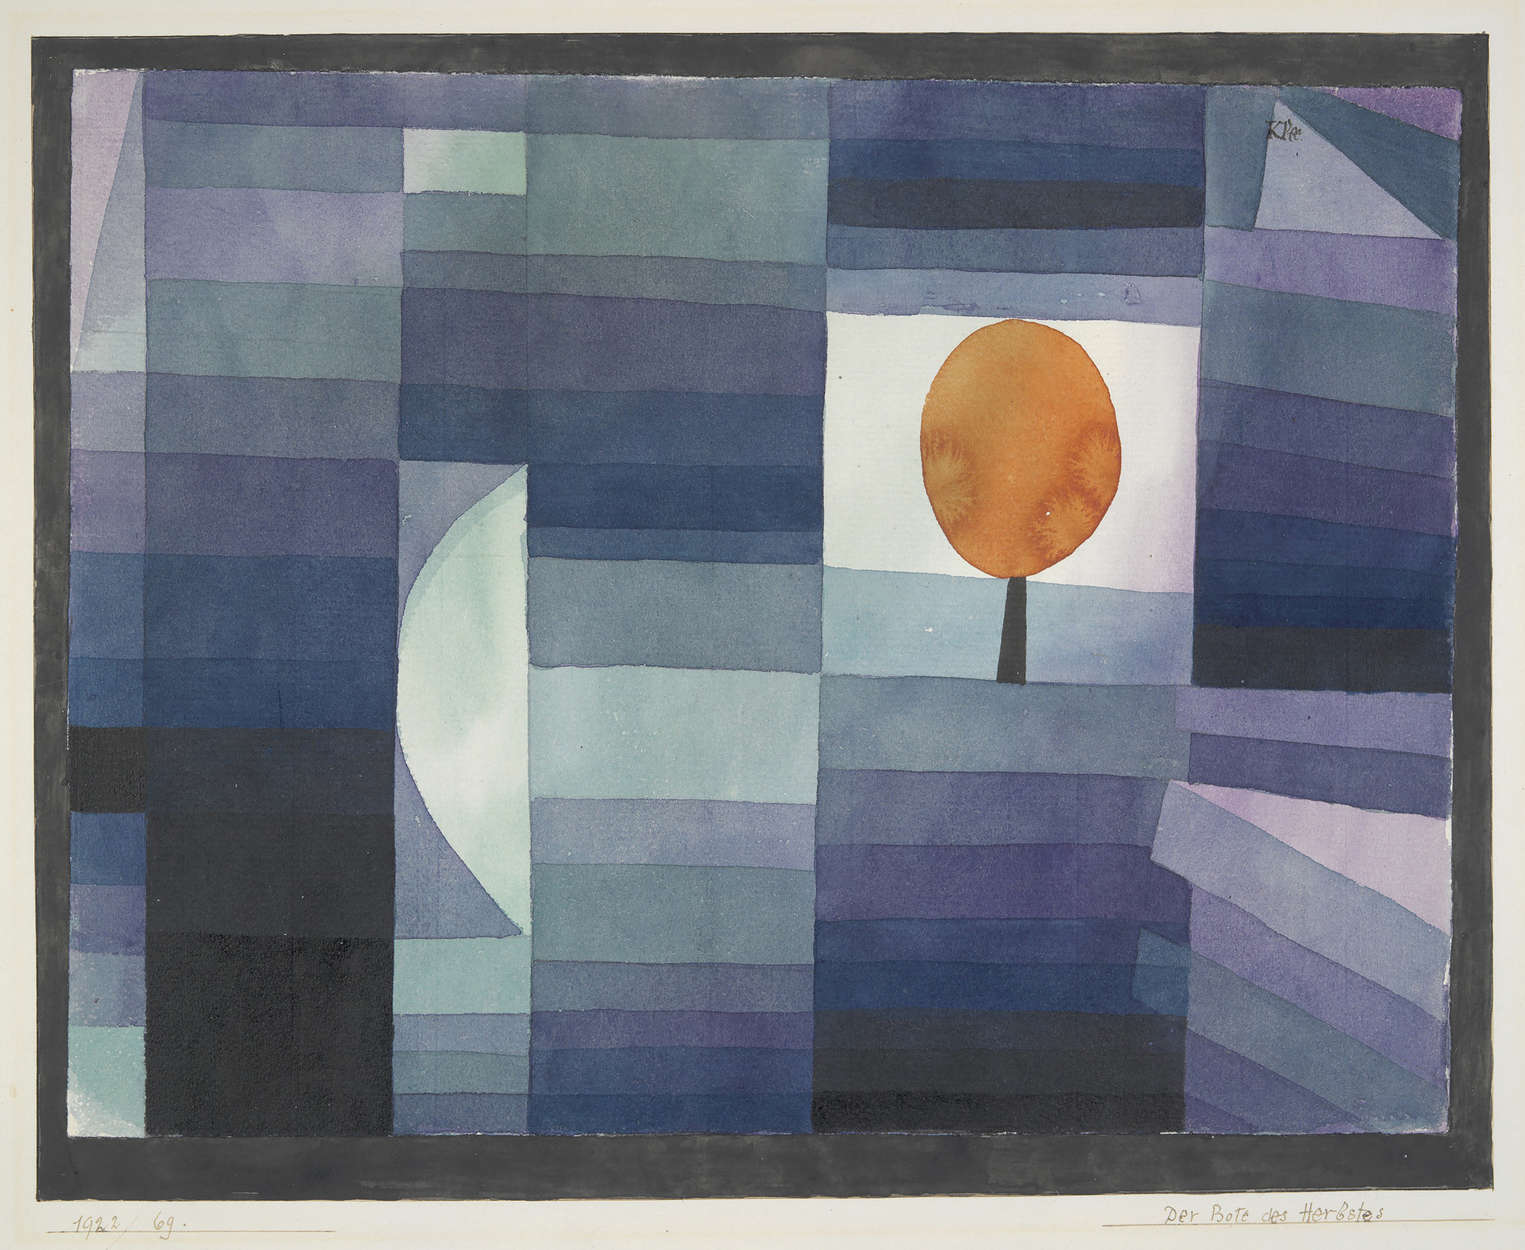             Photo wallpaper "The harbinger of autumn" by Paul Klee
        